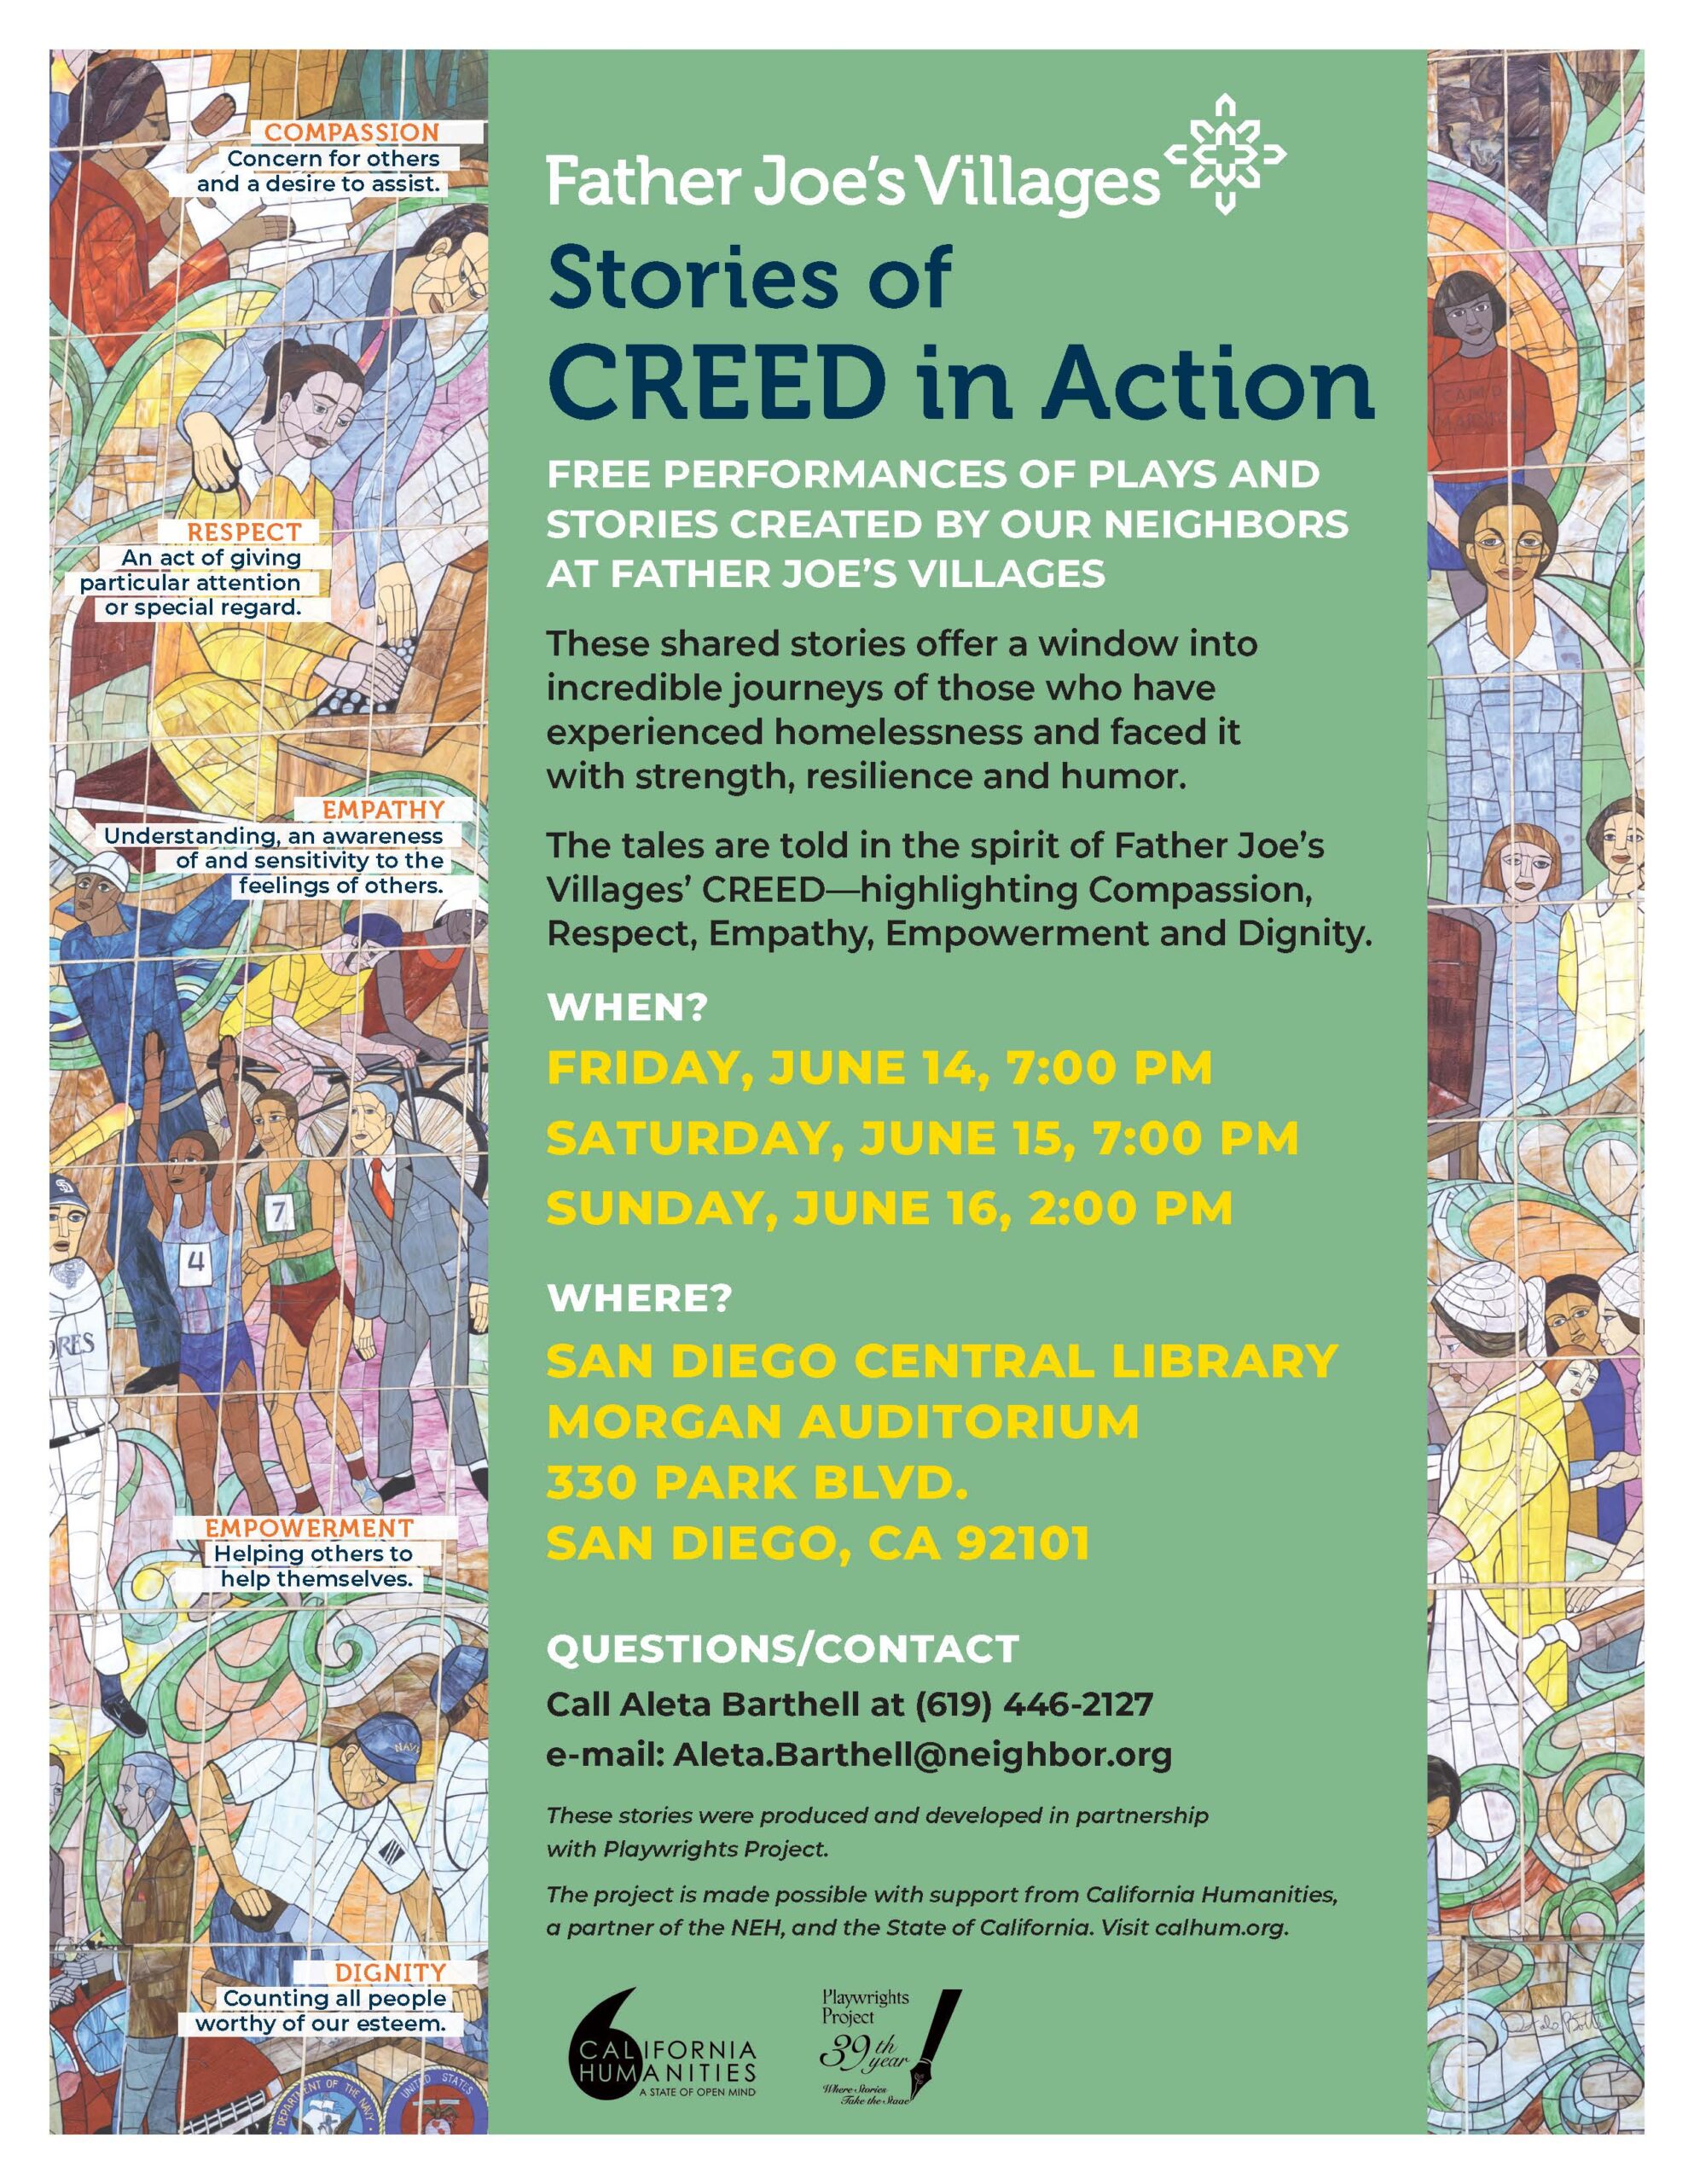 Flyer for Stories of CREED in Action, with Father Joe's Villages logo at the top